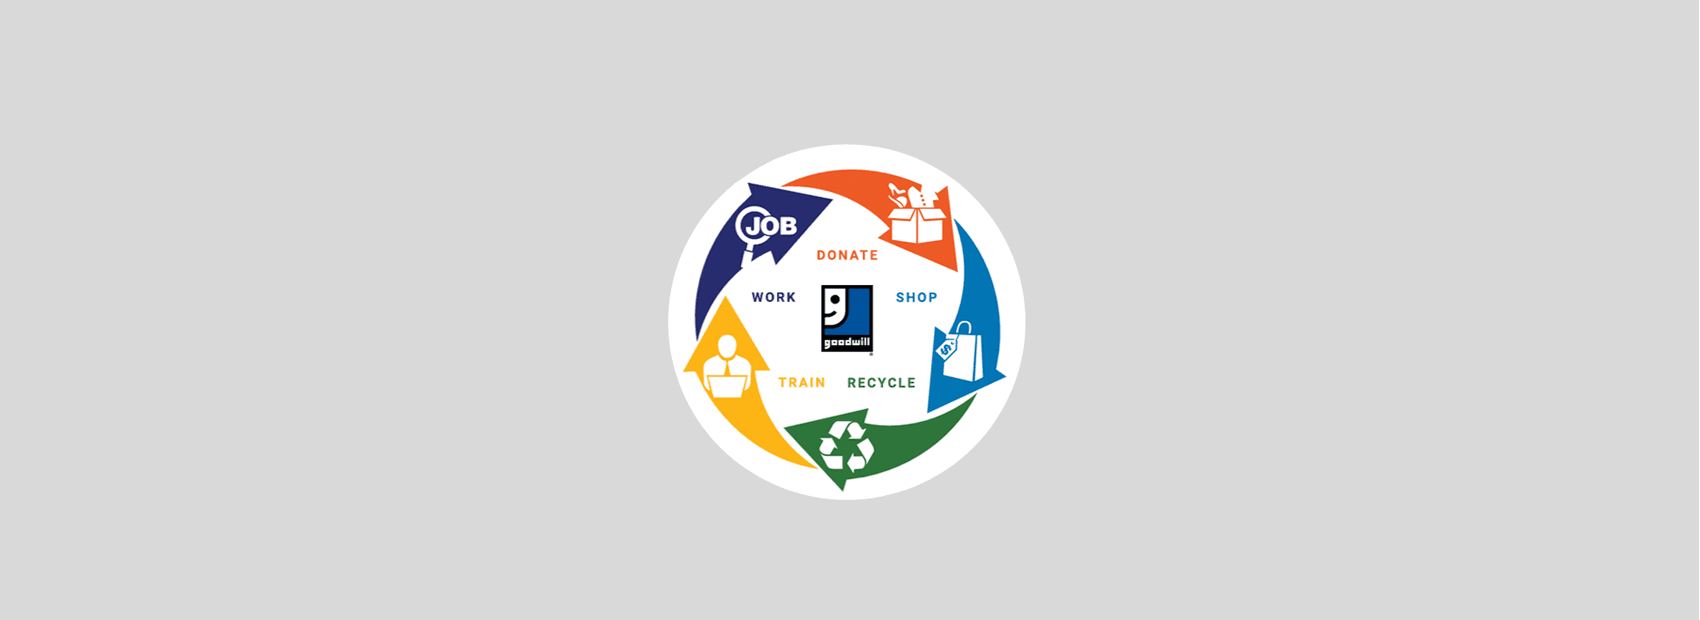 Learn about Goodwill's Cycle of Success